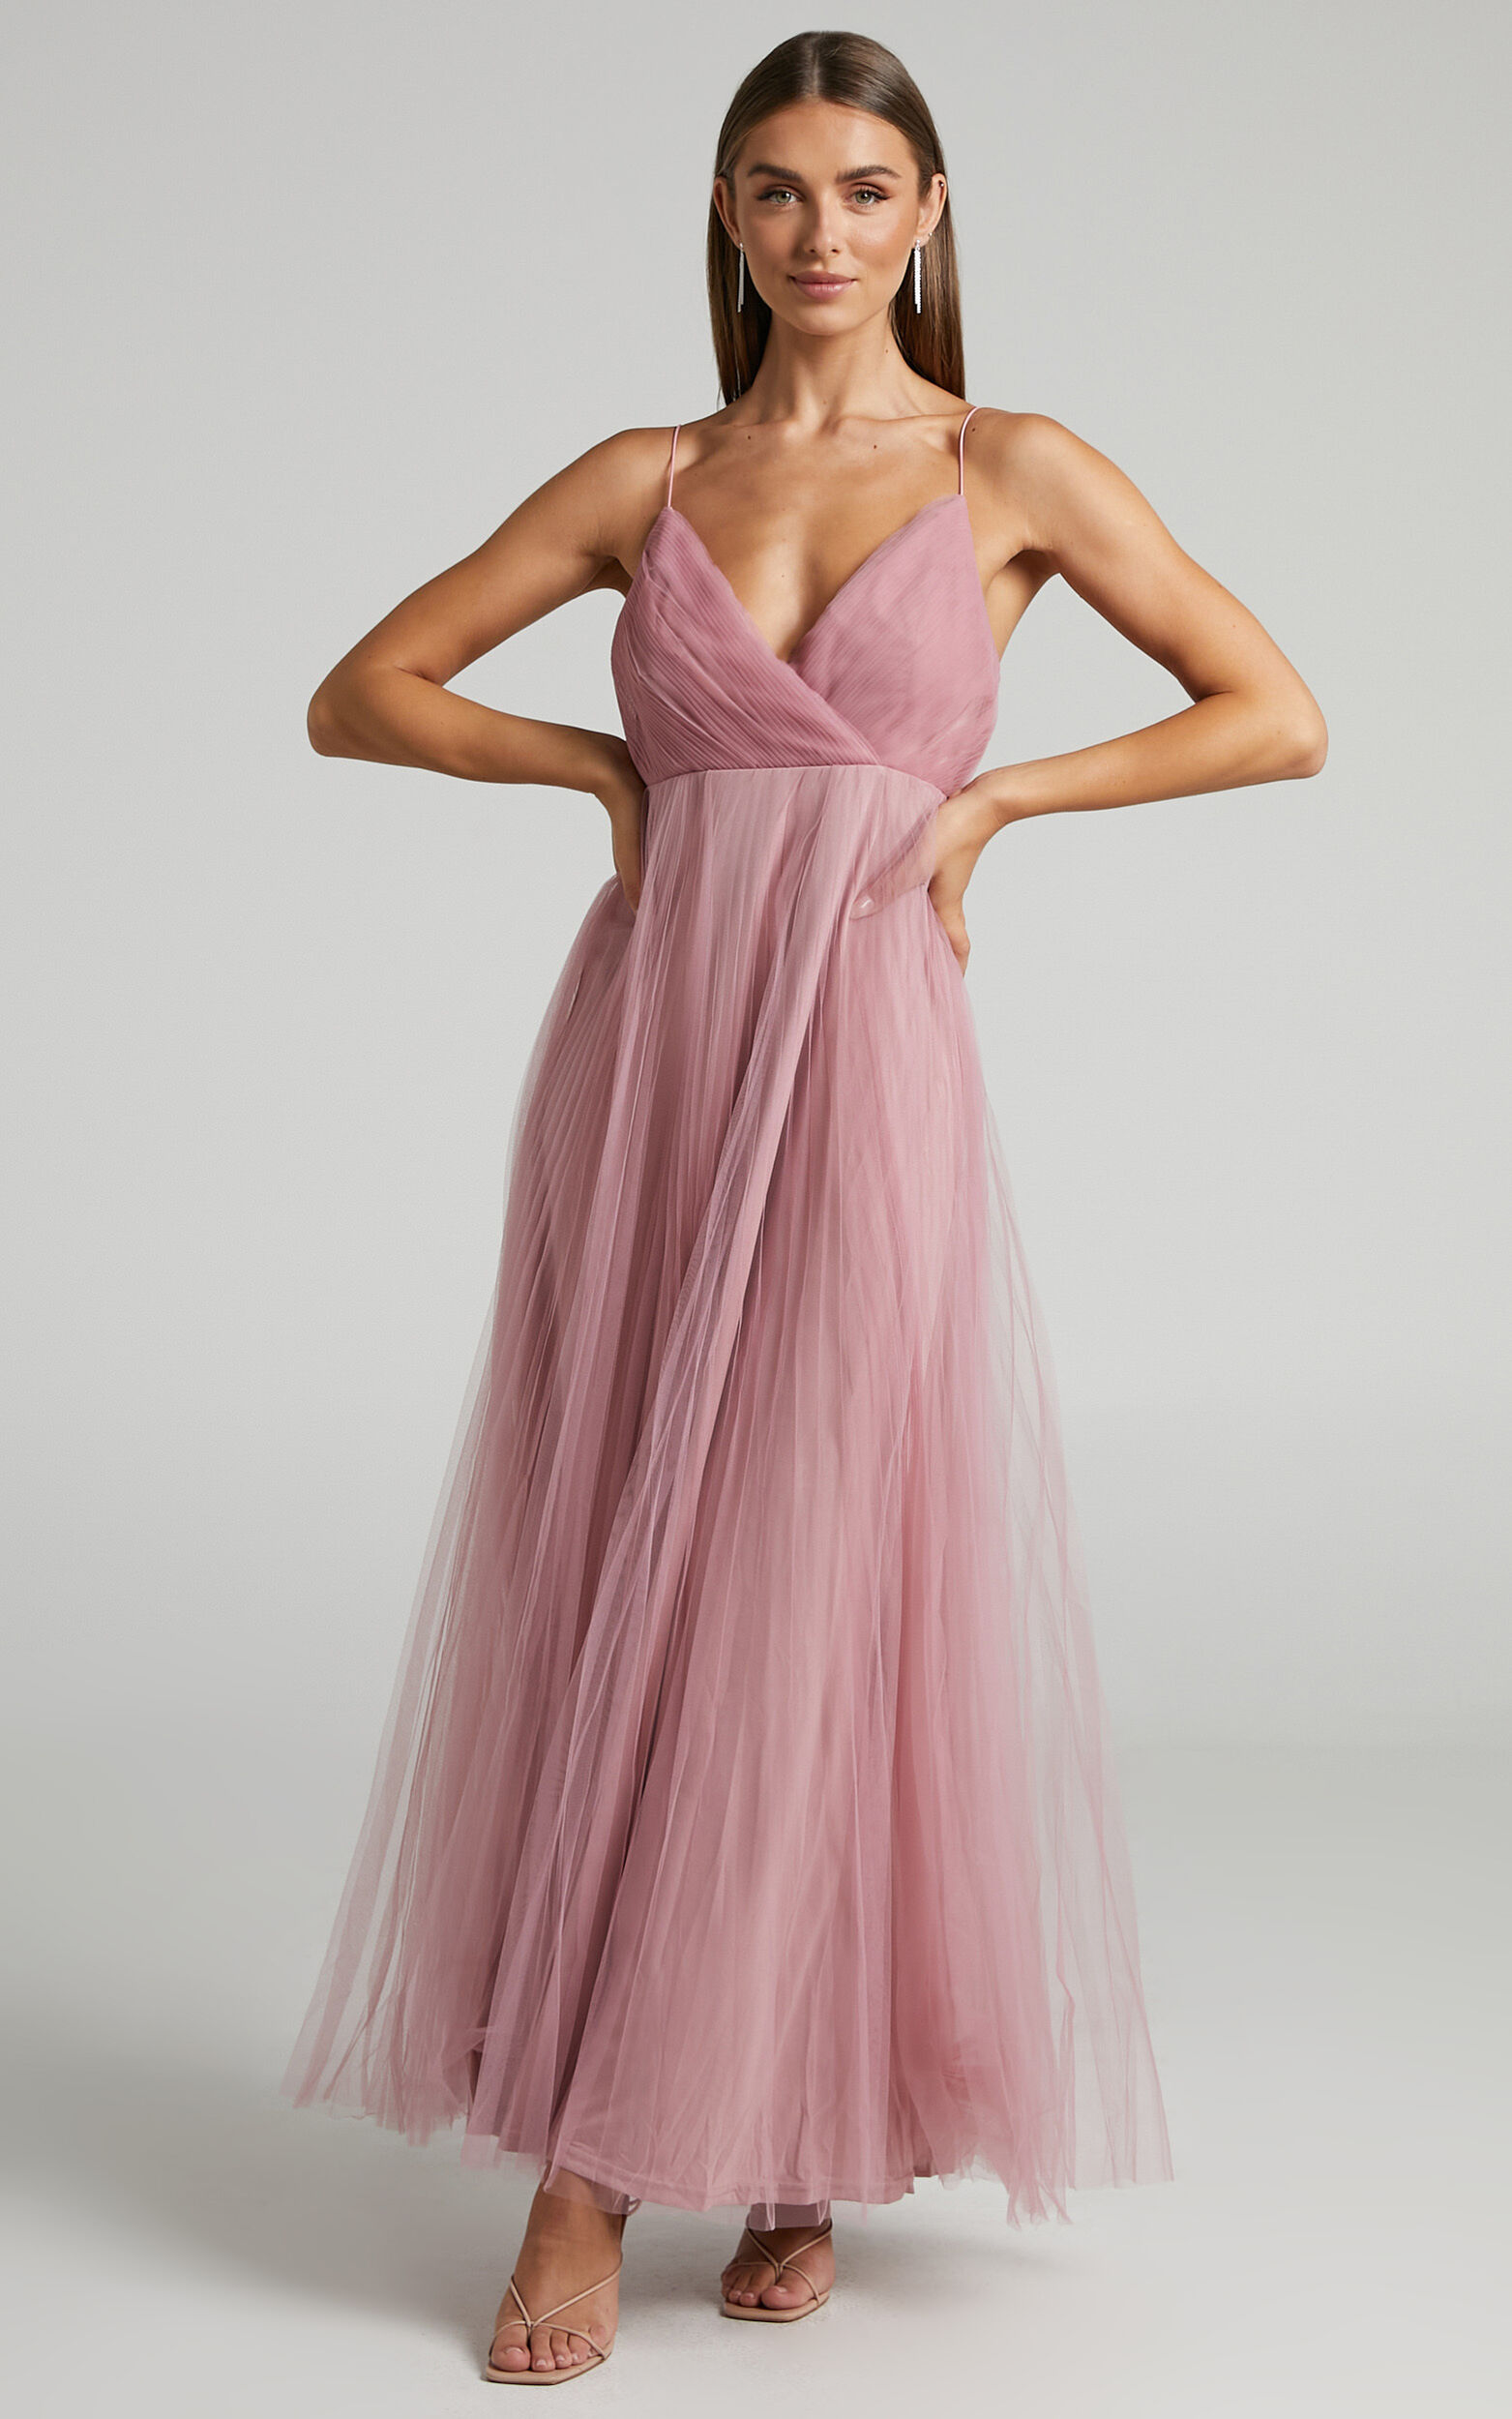 Allany Maxi Dress - Faux Wrap Bodice Pleated Tulle Dress in Dusty Pink - 04, PNK1